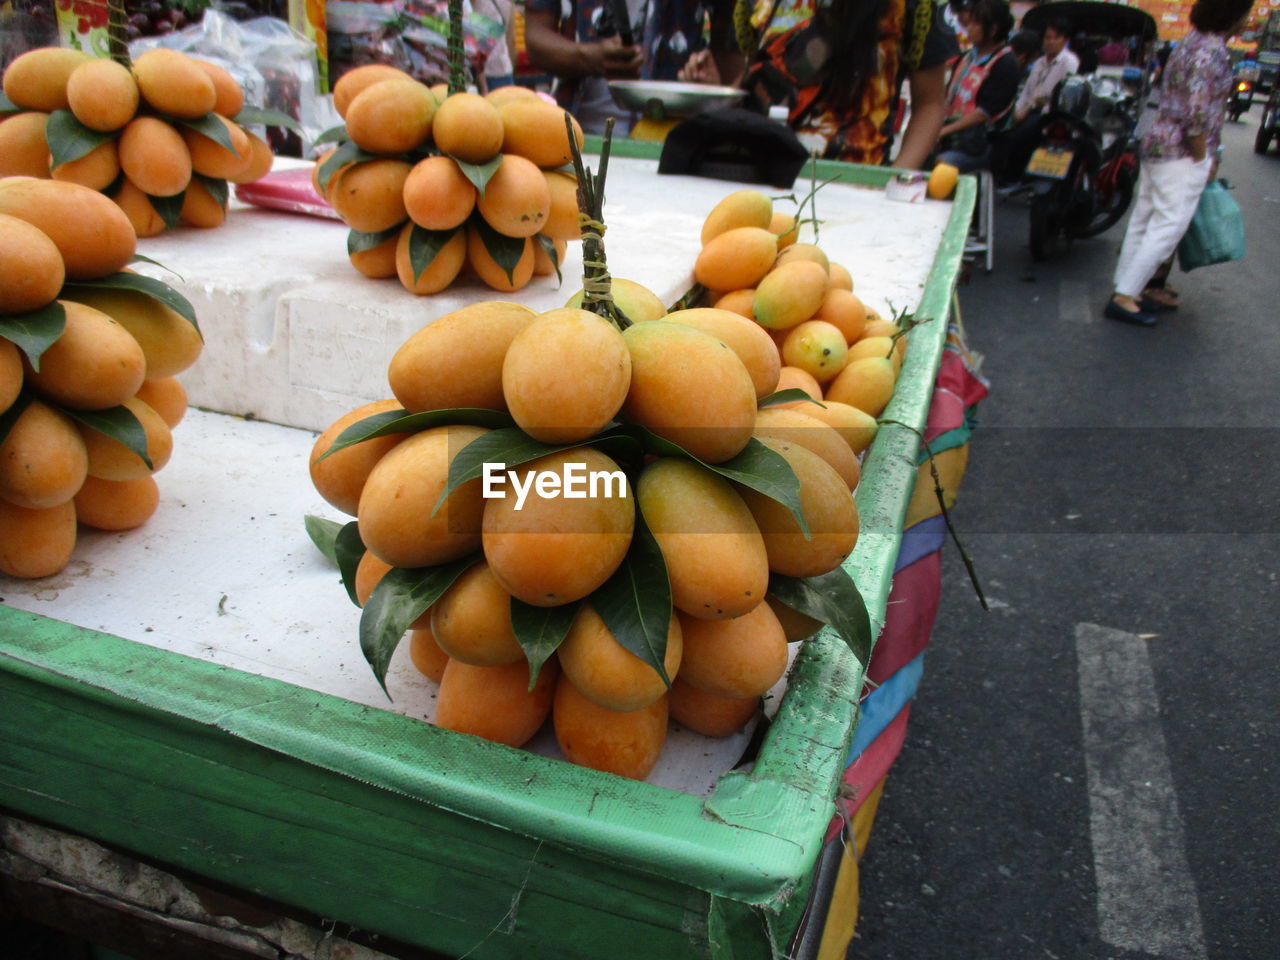 HIGH ANGLE VIEW OF VARIOUS FRUITS FOR SALE AT MARKET STALL